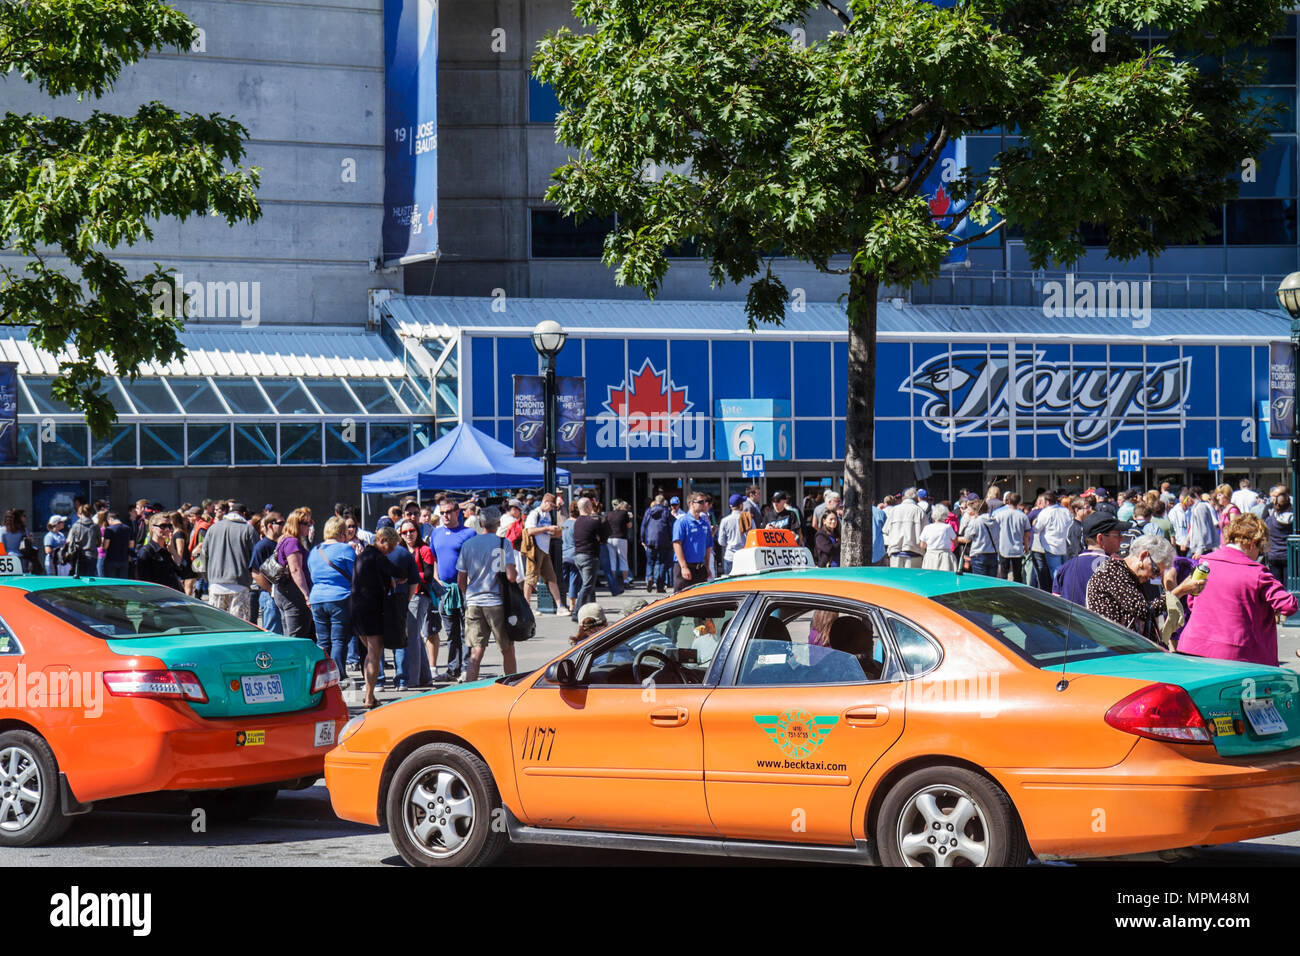 Toronto Canada,Bremner Boulevard,Rogers Centre,center,Blue Jays,Major  League Baseball teamal sports,outside stadium,game day,arriving fans,taxi,taxis  Stock Photo - Alamy